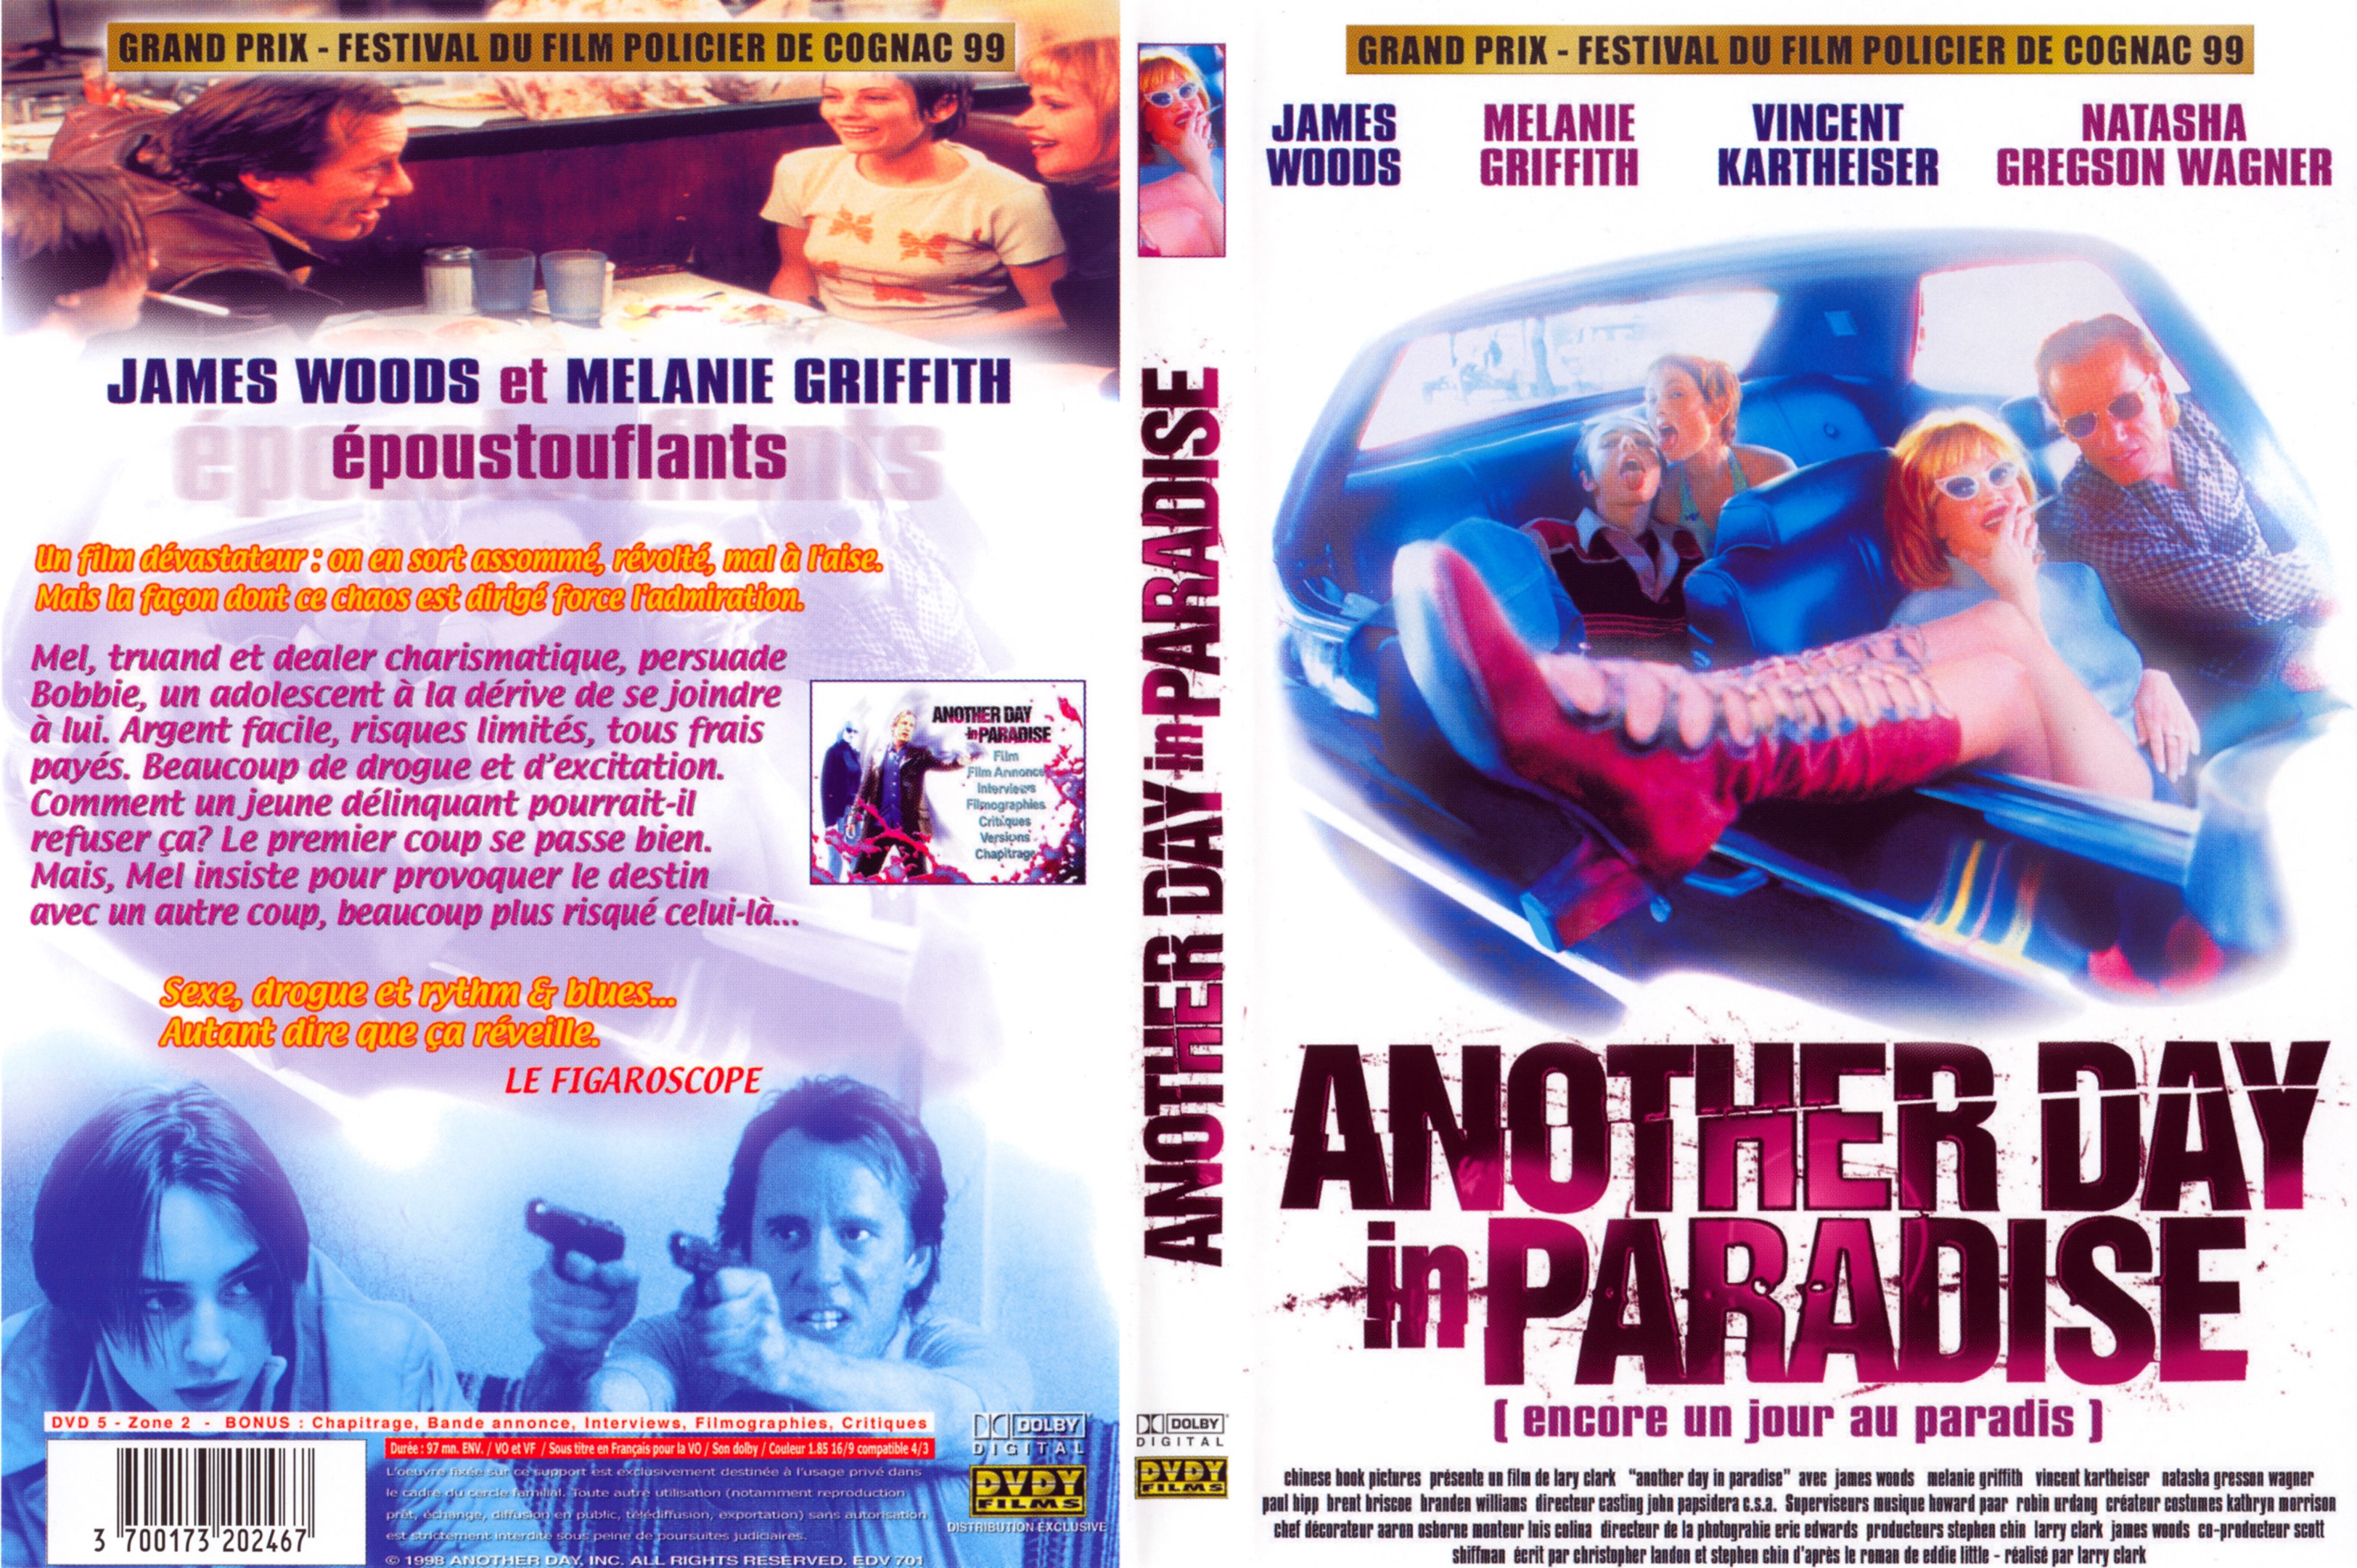 Jaquette DVD Another day in paradise v2